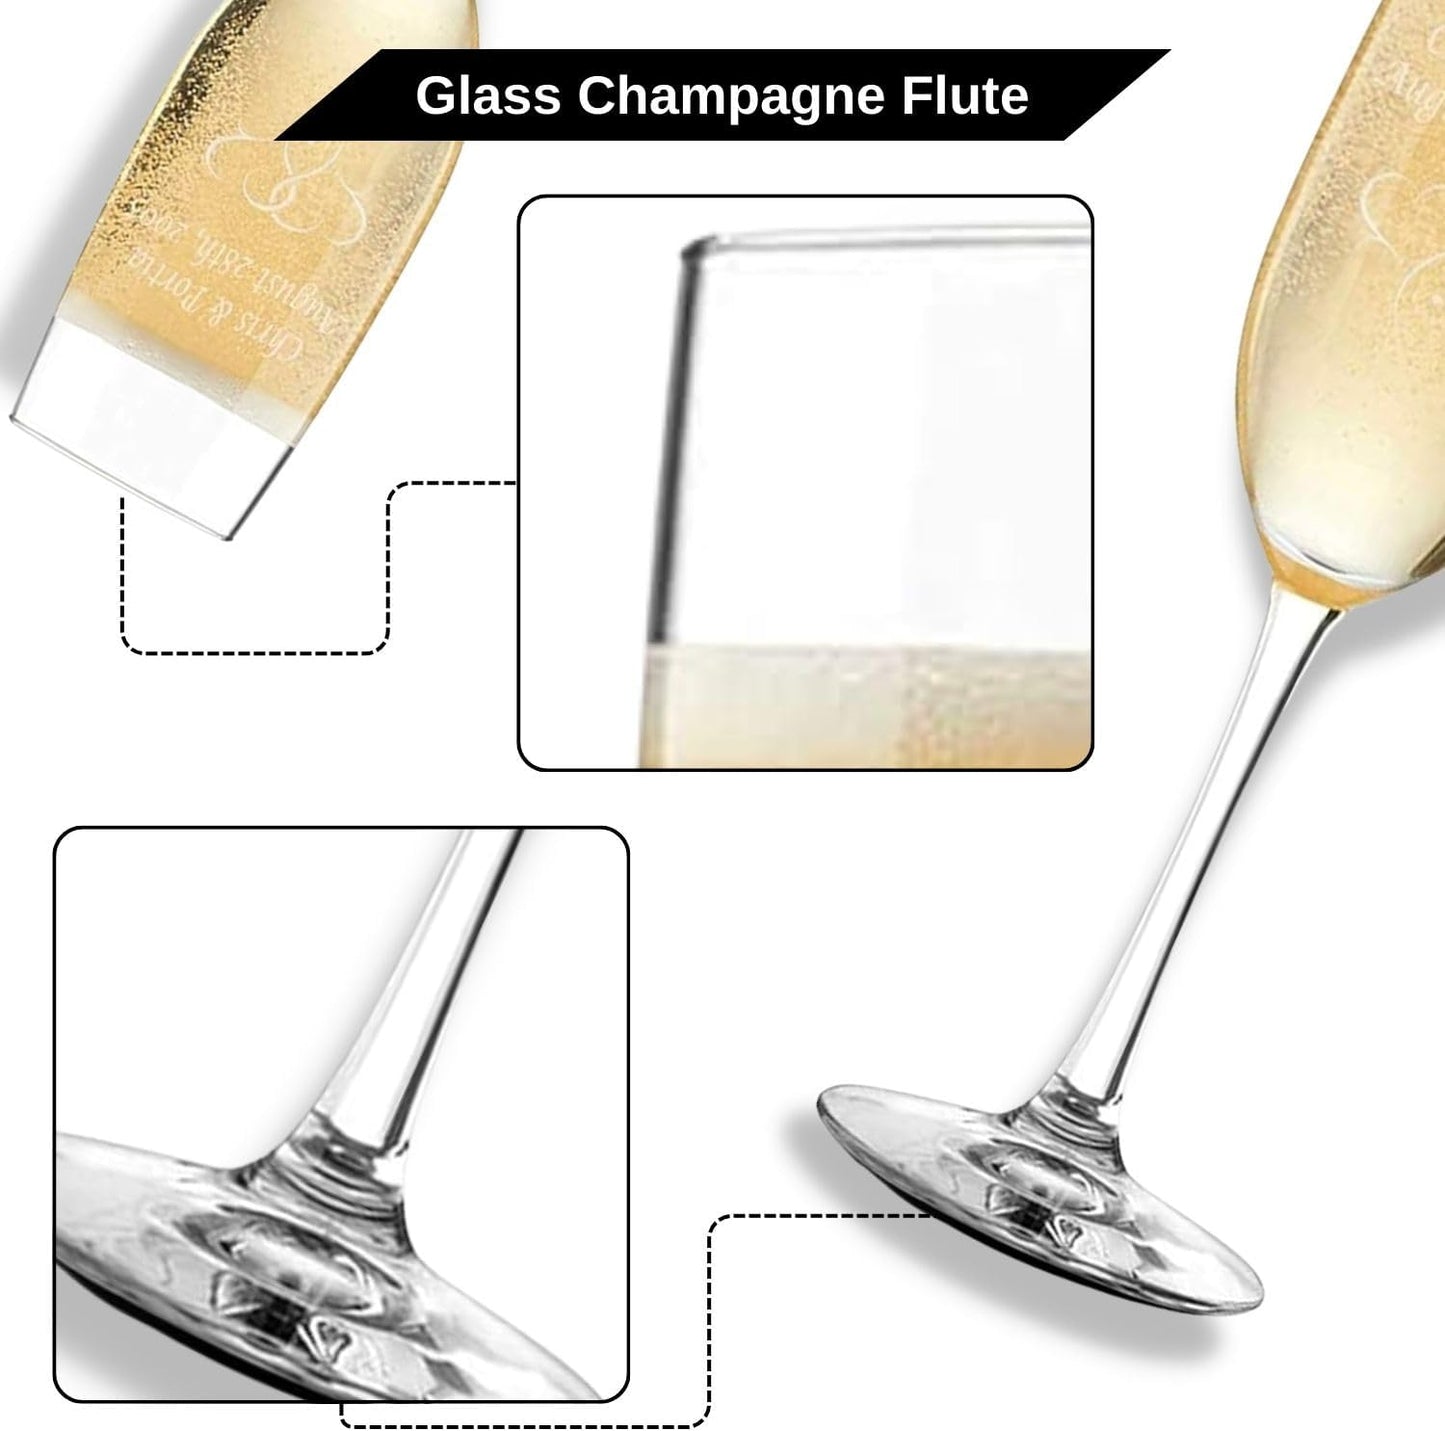 Personalized Champagne Flutes Set of 2, Wedding Gifts for Bride and Groom with Couple's Names and Date, Interlaced Hearts, Customized Champagne Flutes, Modern Toasting Glasses